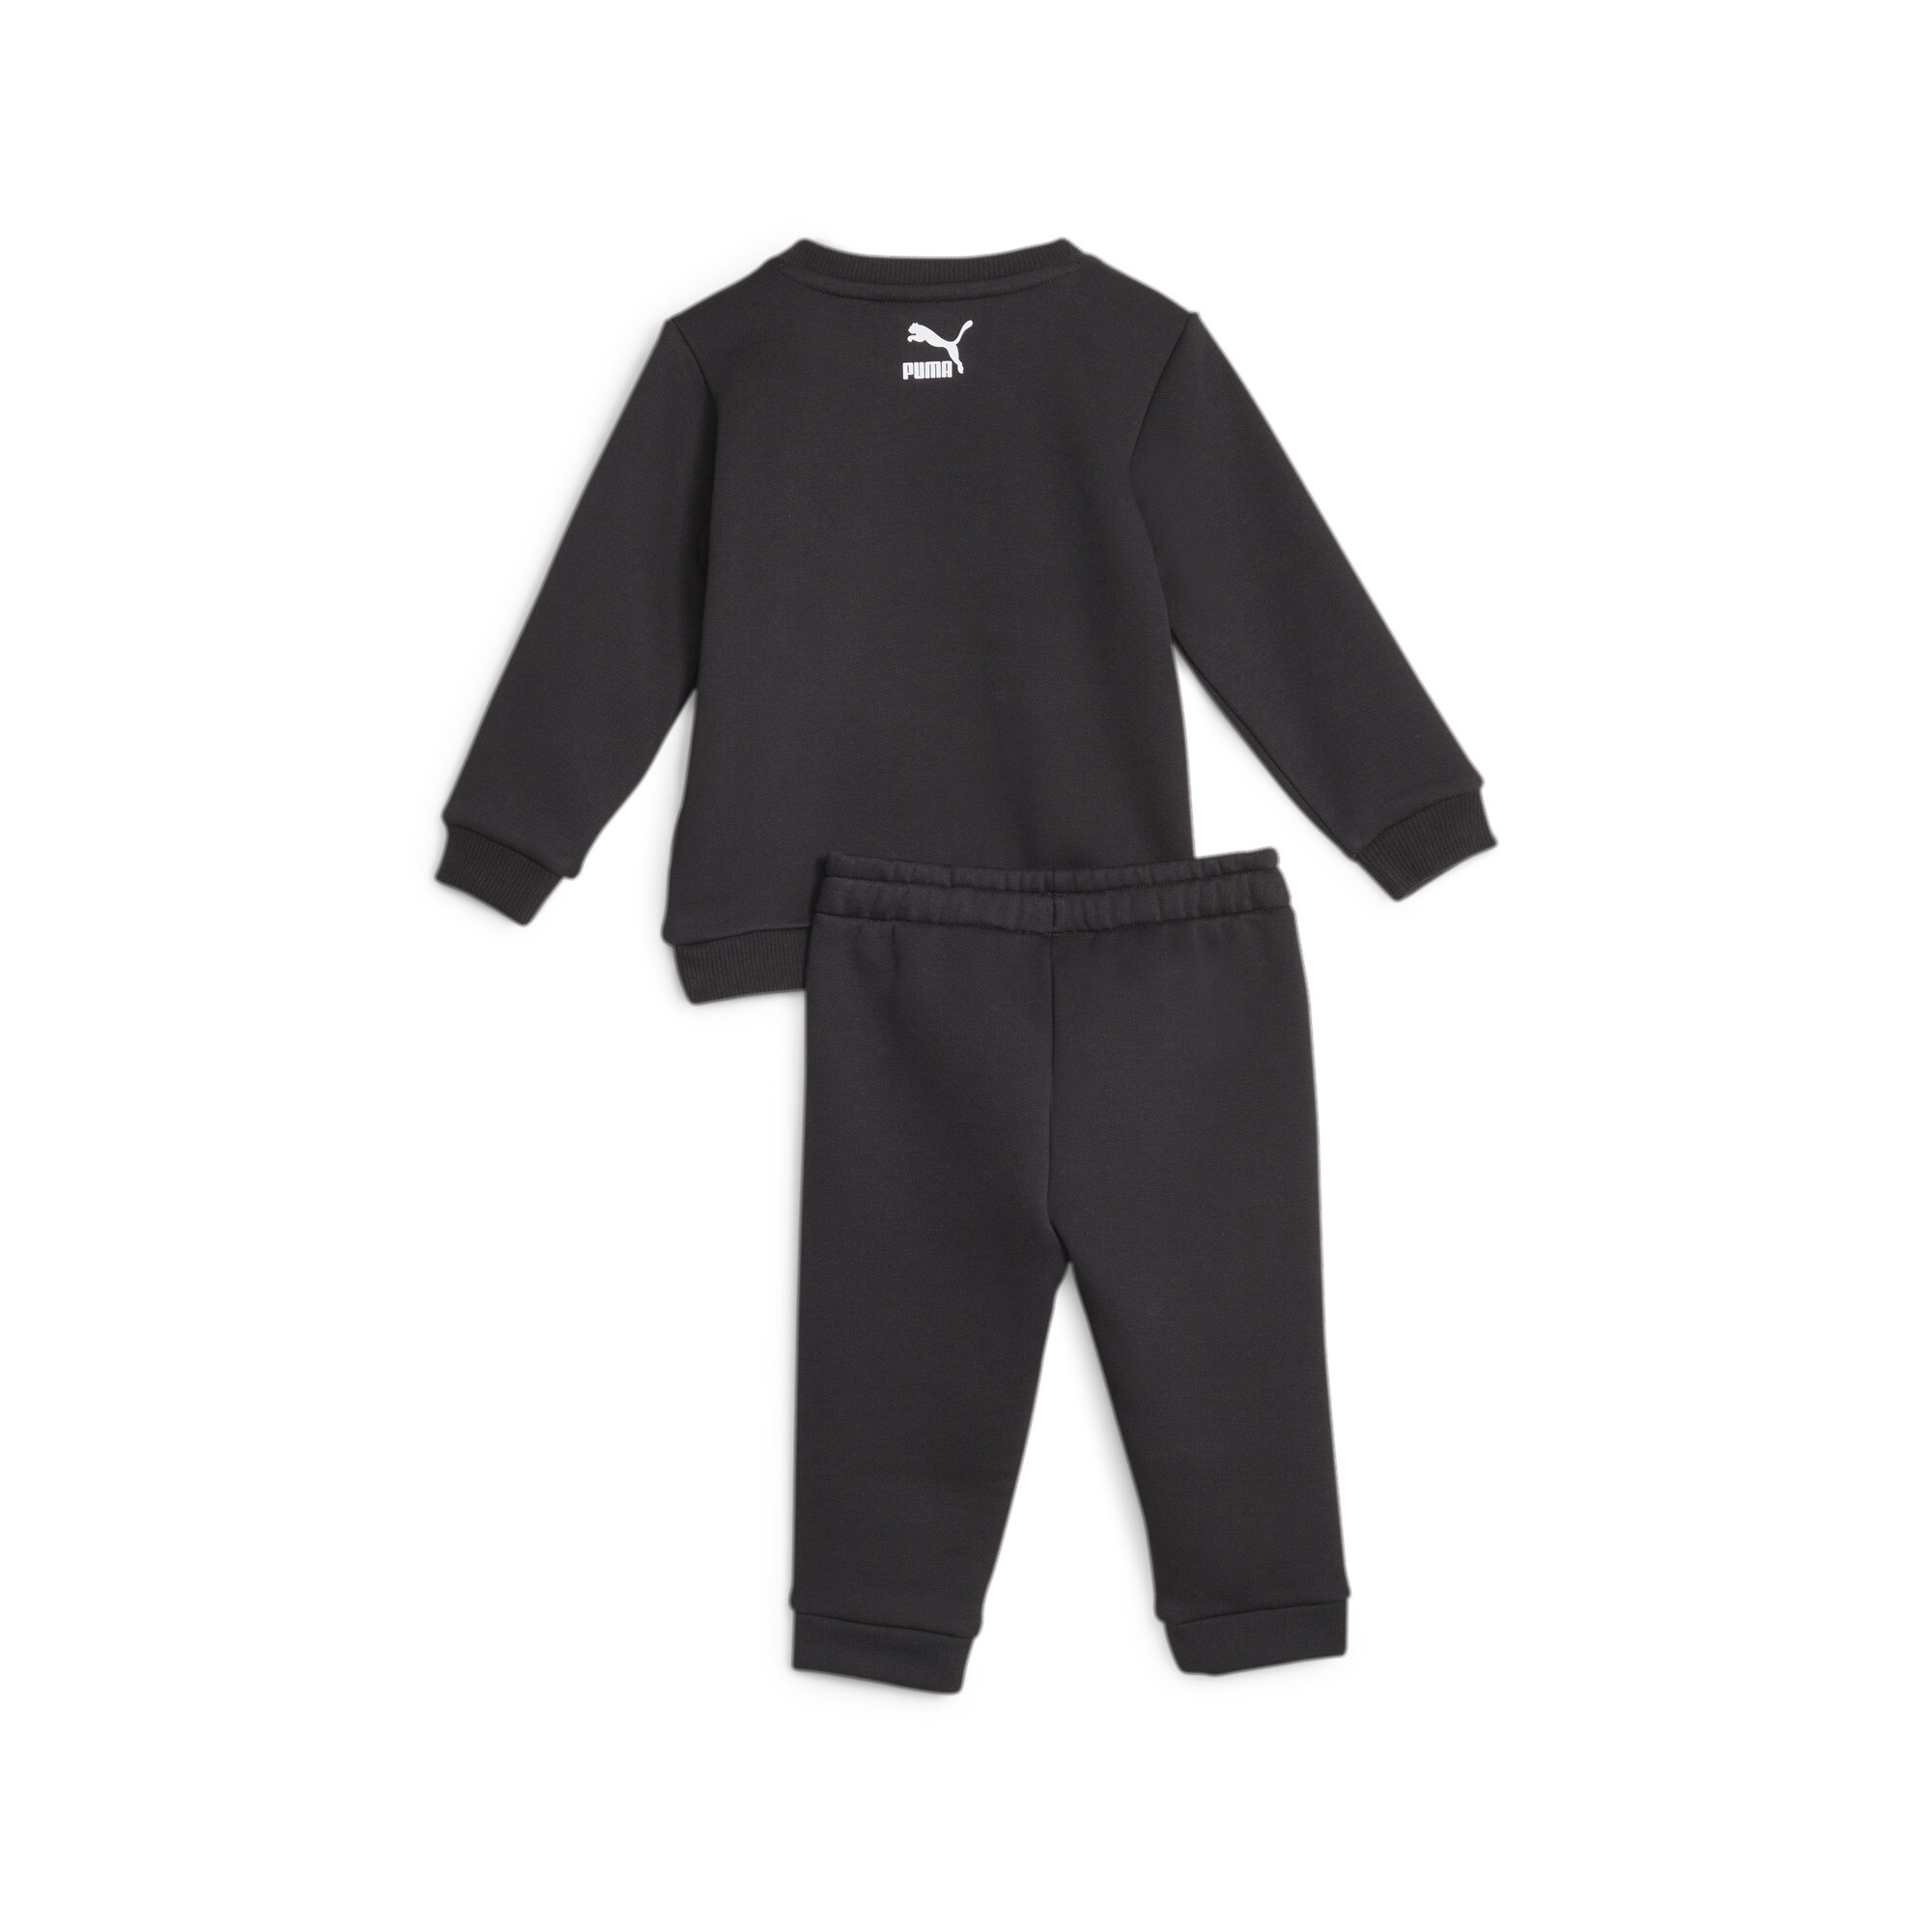 Kids' PUMA X MIRACULOUS Toddlers' Jogger In Black, Size 2-3 Months